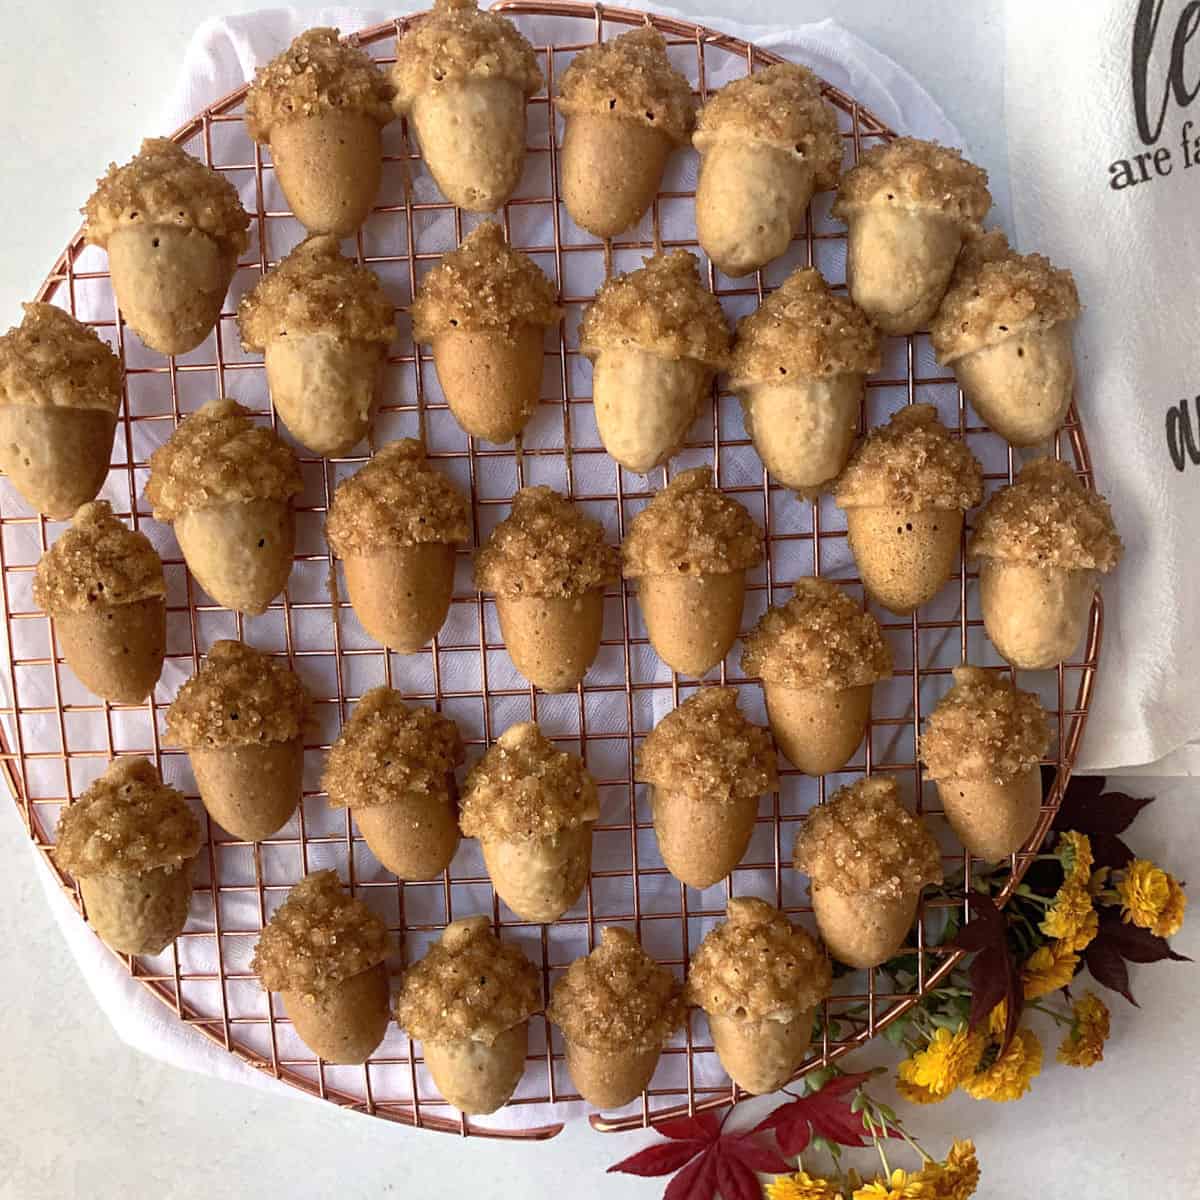 Maple cakes that look like acorns on a wire rack.